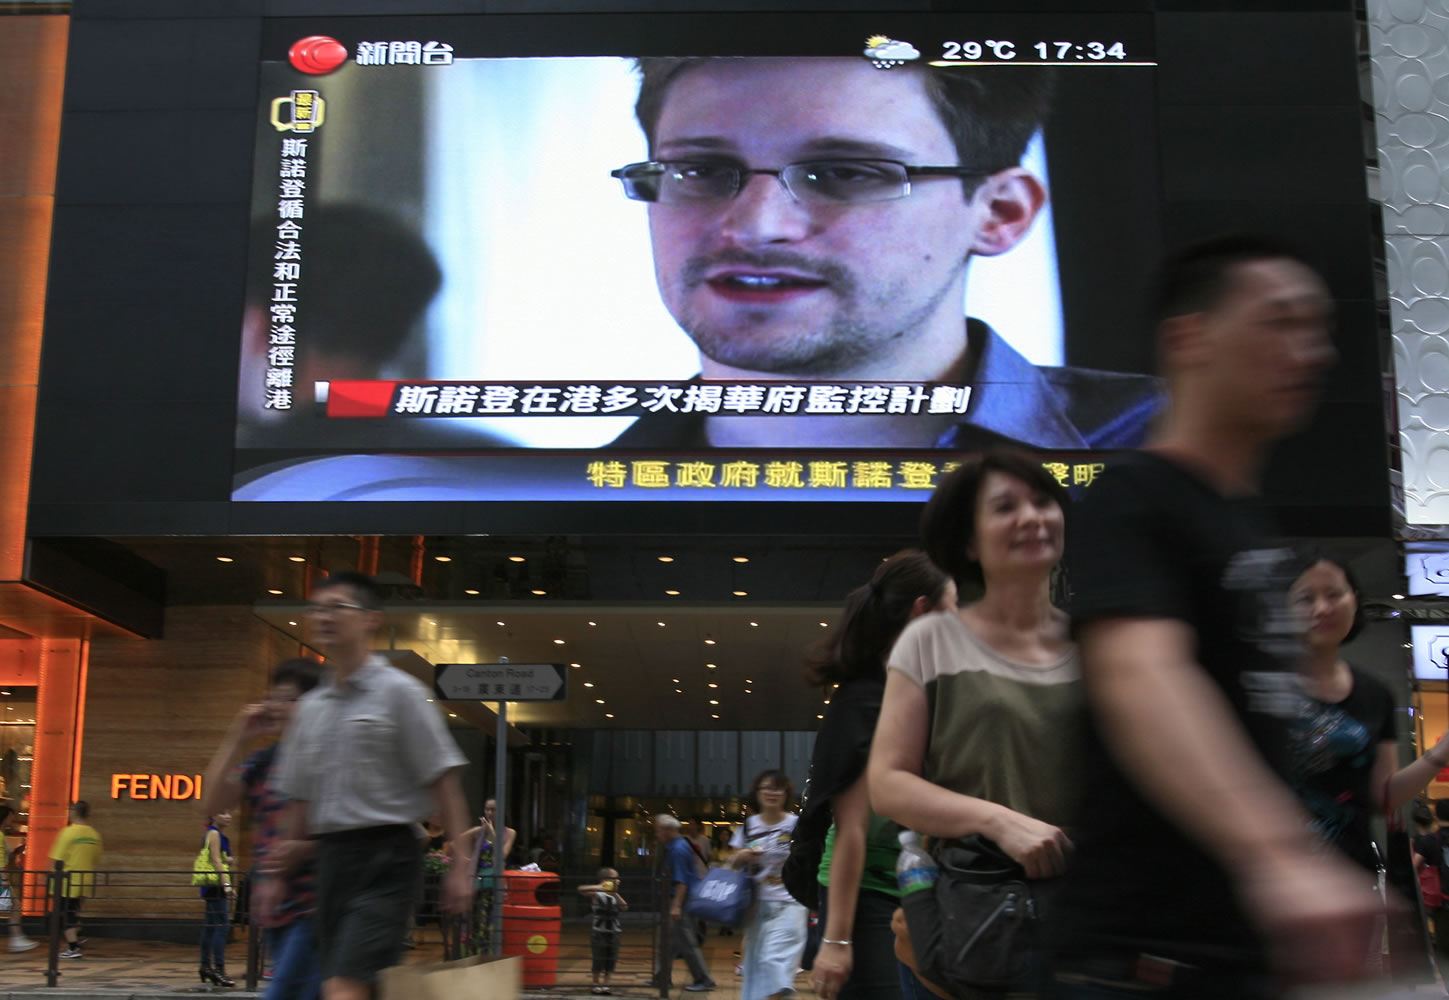 A TV screen shows a news report of Edward Snowden, a former CIA employee who leaked top-secret documents about sweeping U.S.